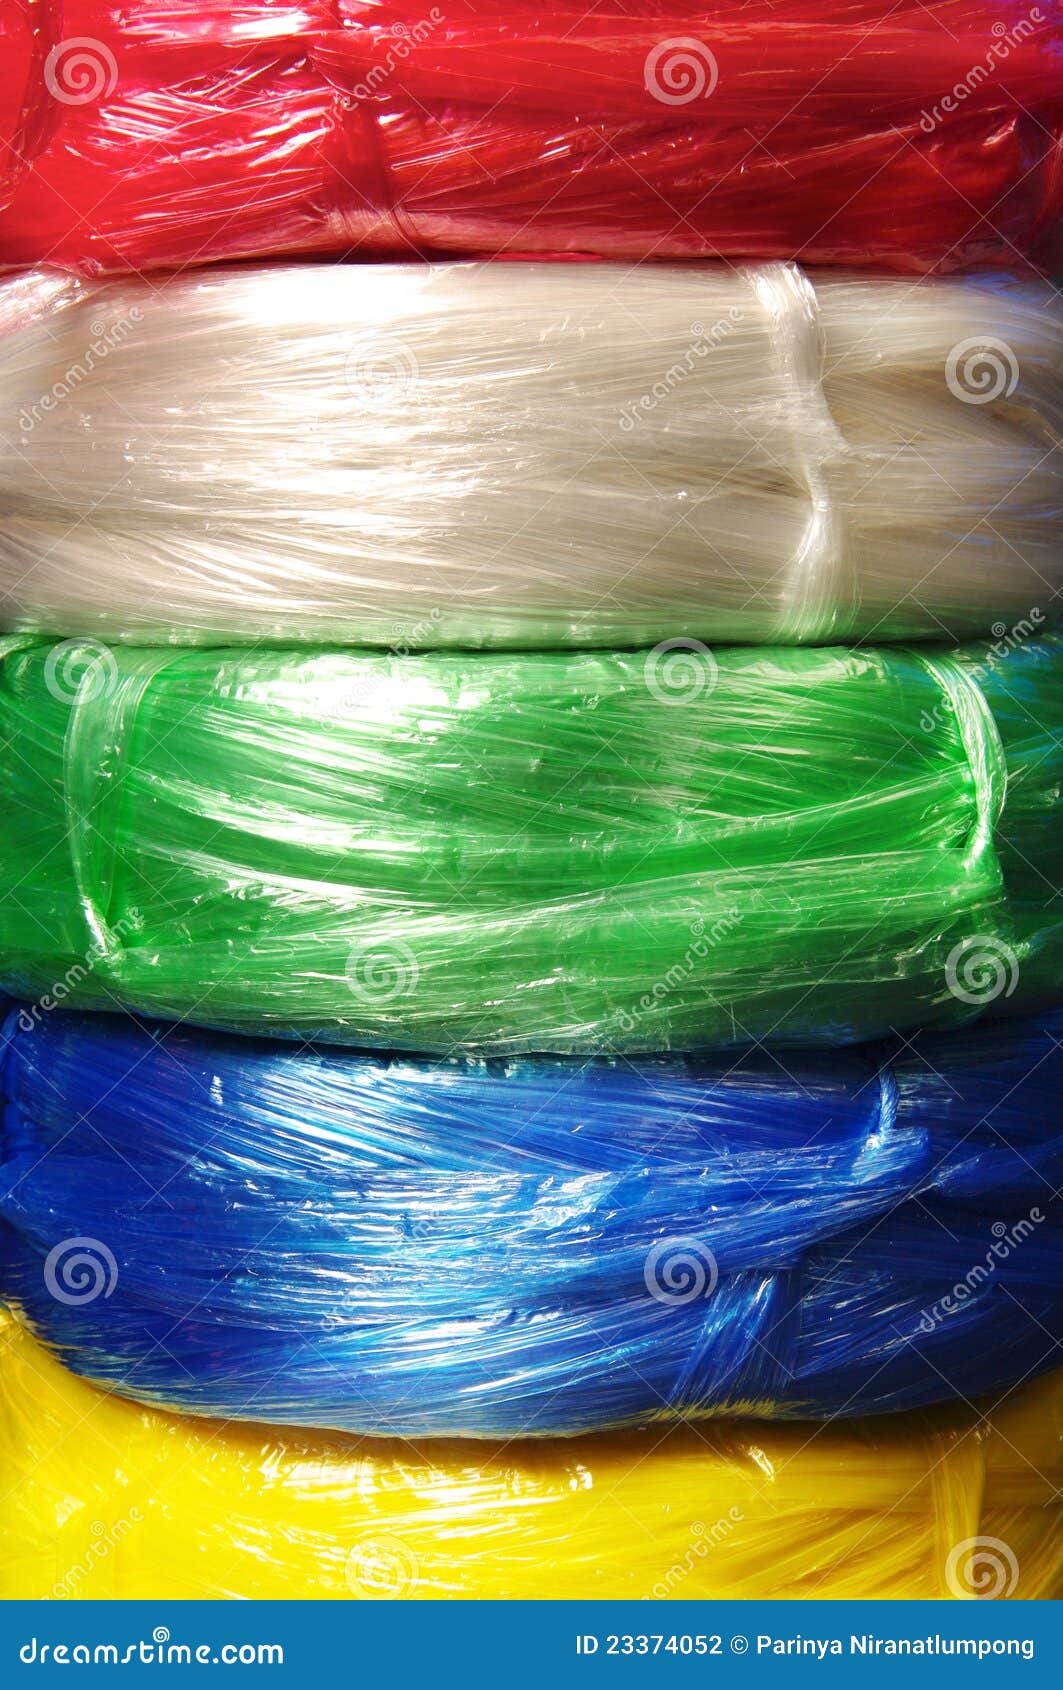 Colorful Plastic Rope stock photo. Image of lasso, line - 23374052